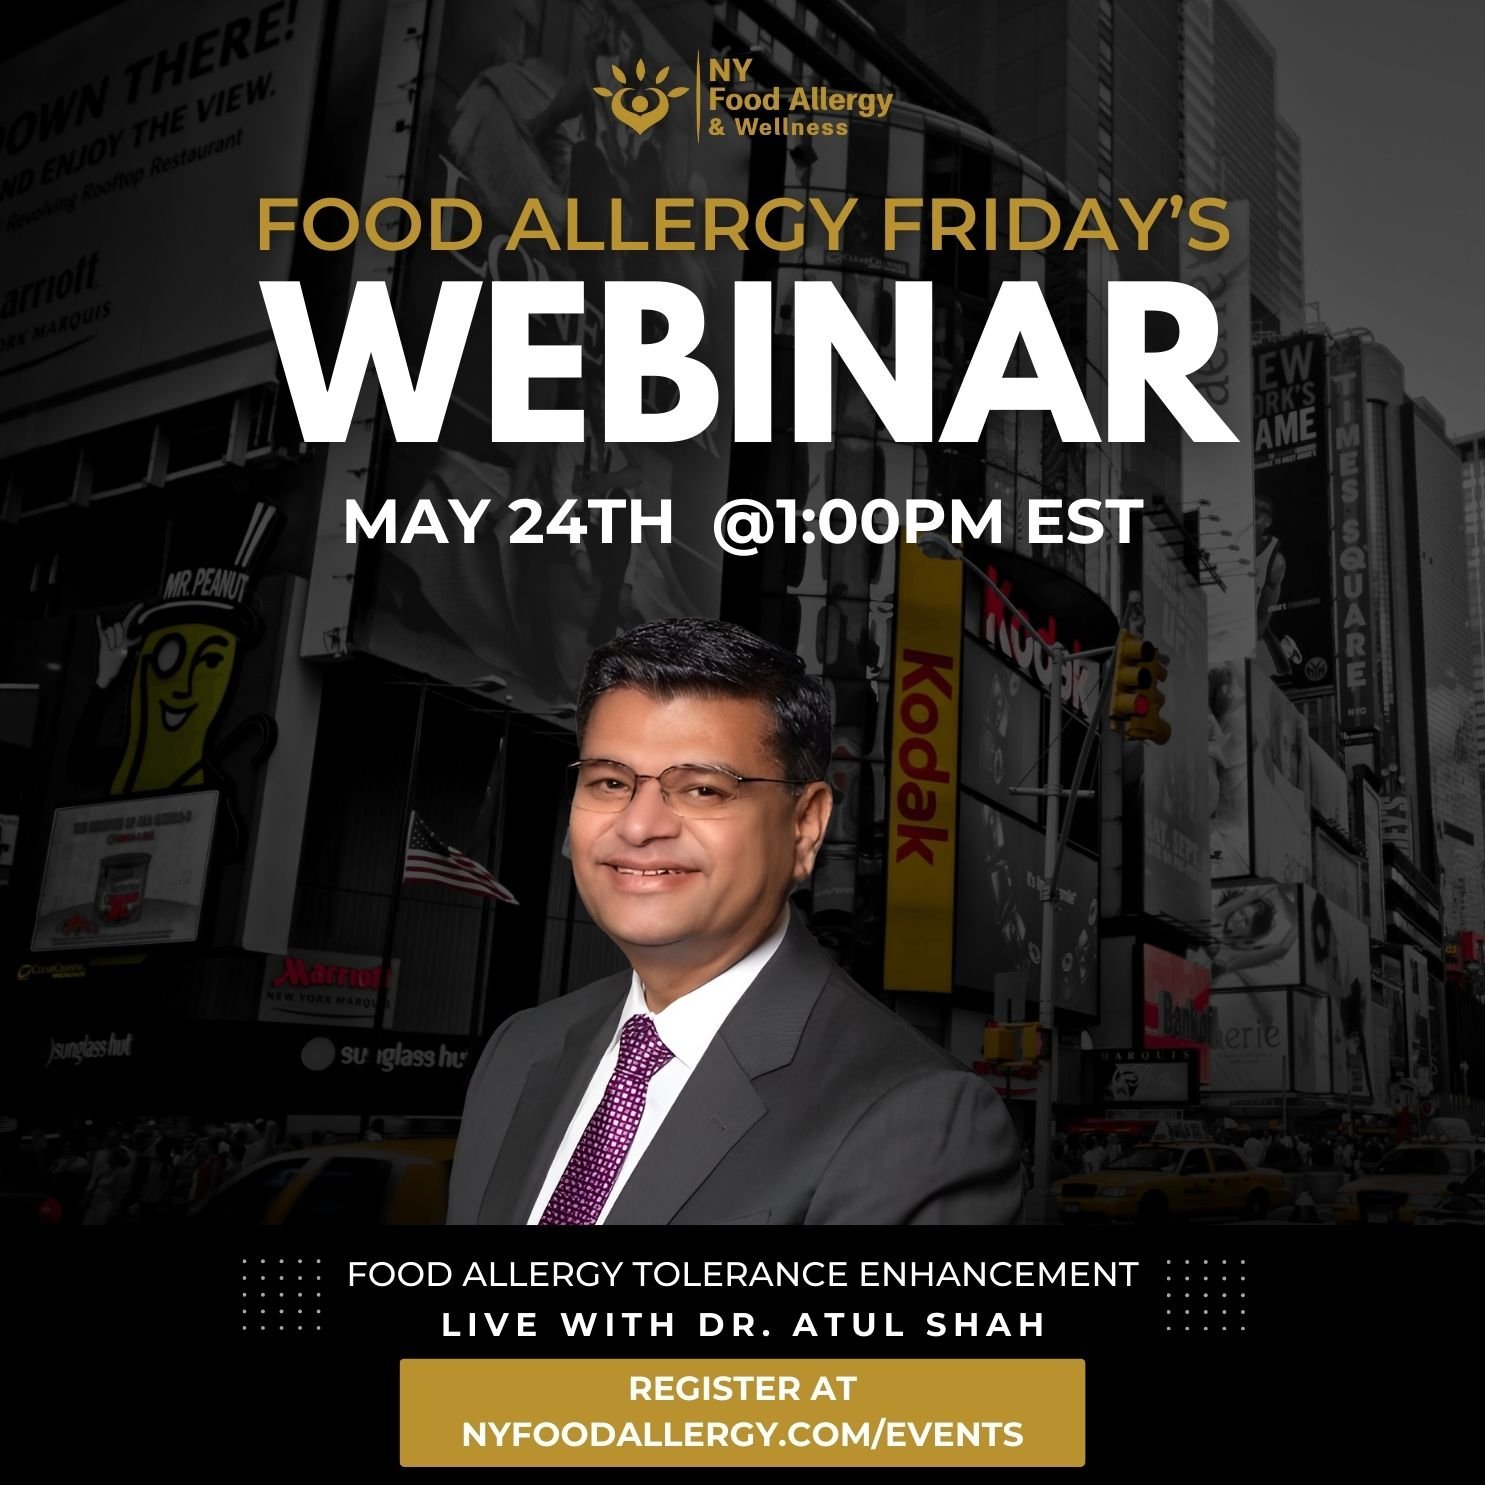 Join us for an enlightening session at our next 🌟 Food Allergy Friday's Webinar 🌟! 📅 May 24th at 1:00 PM EST.

Unlock the potential of Food Allergy Tolerance Enhancement (FATE) with Dr. Atul Shah, who has guided over 15,000 families to food allerg